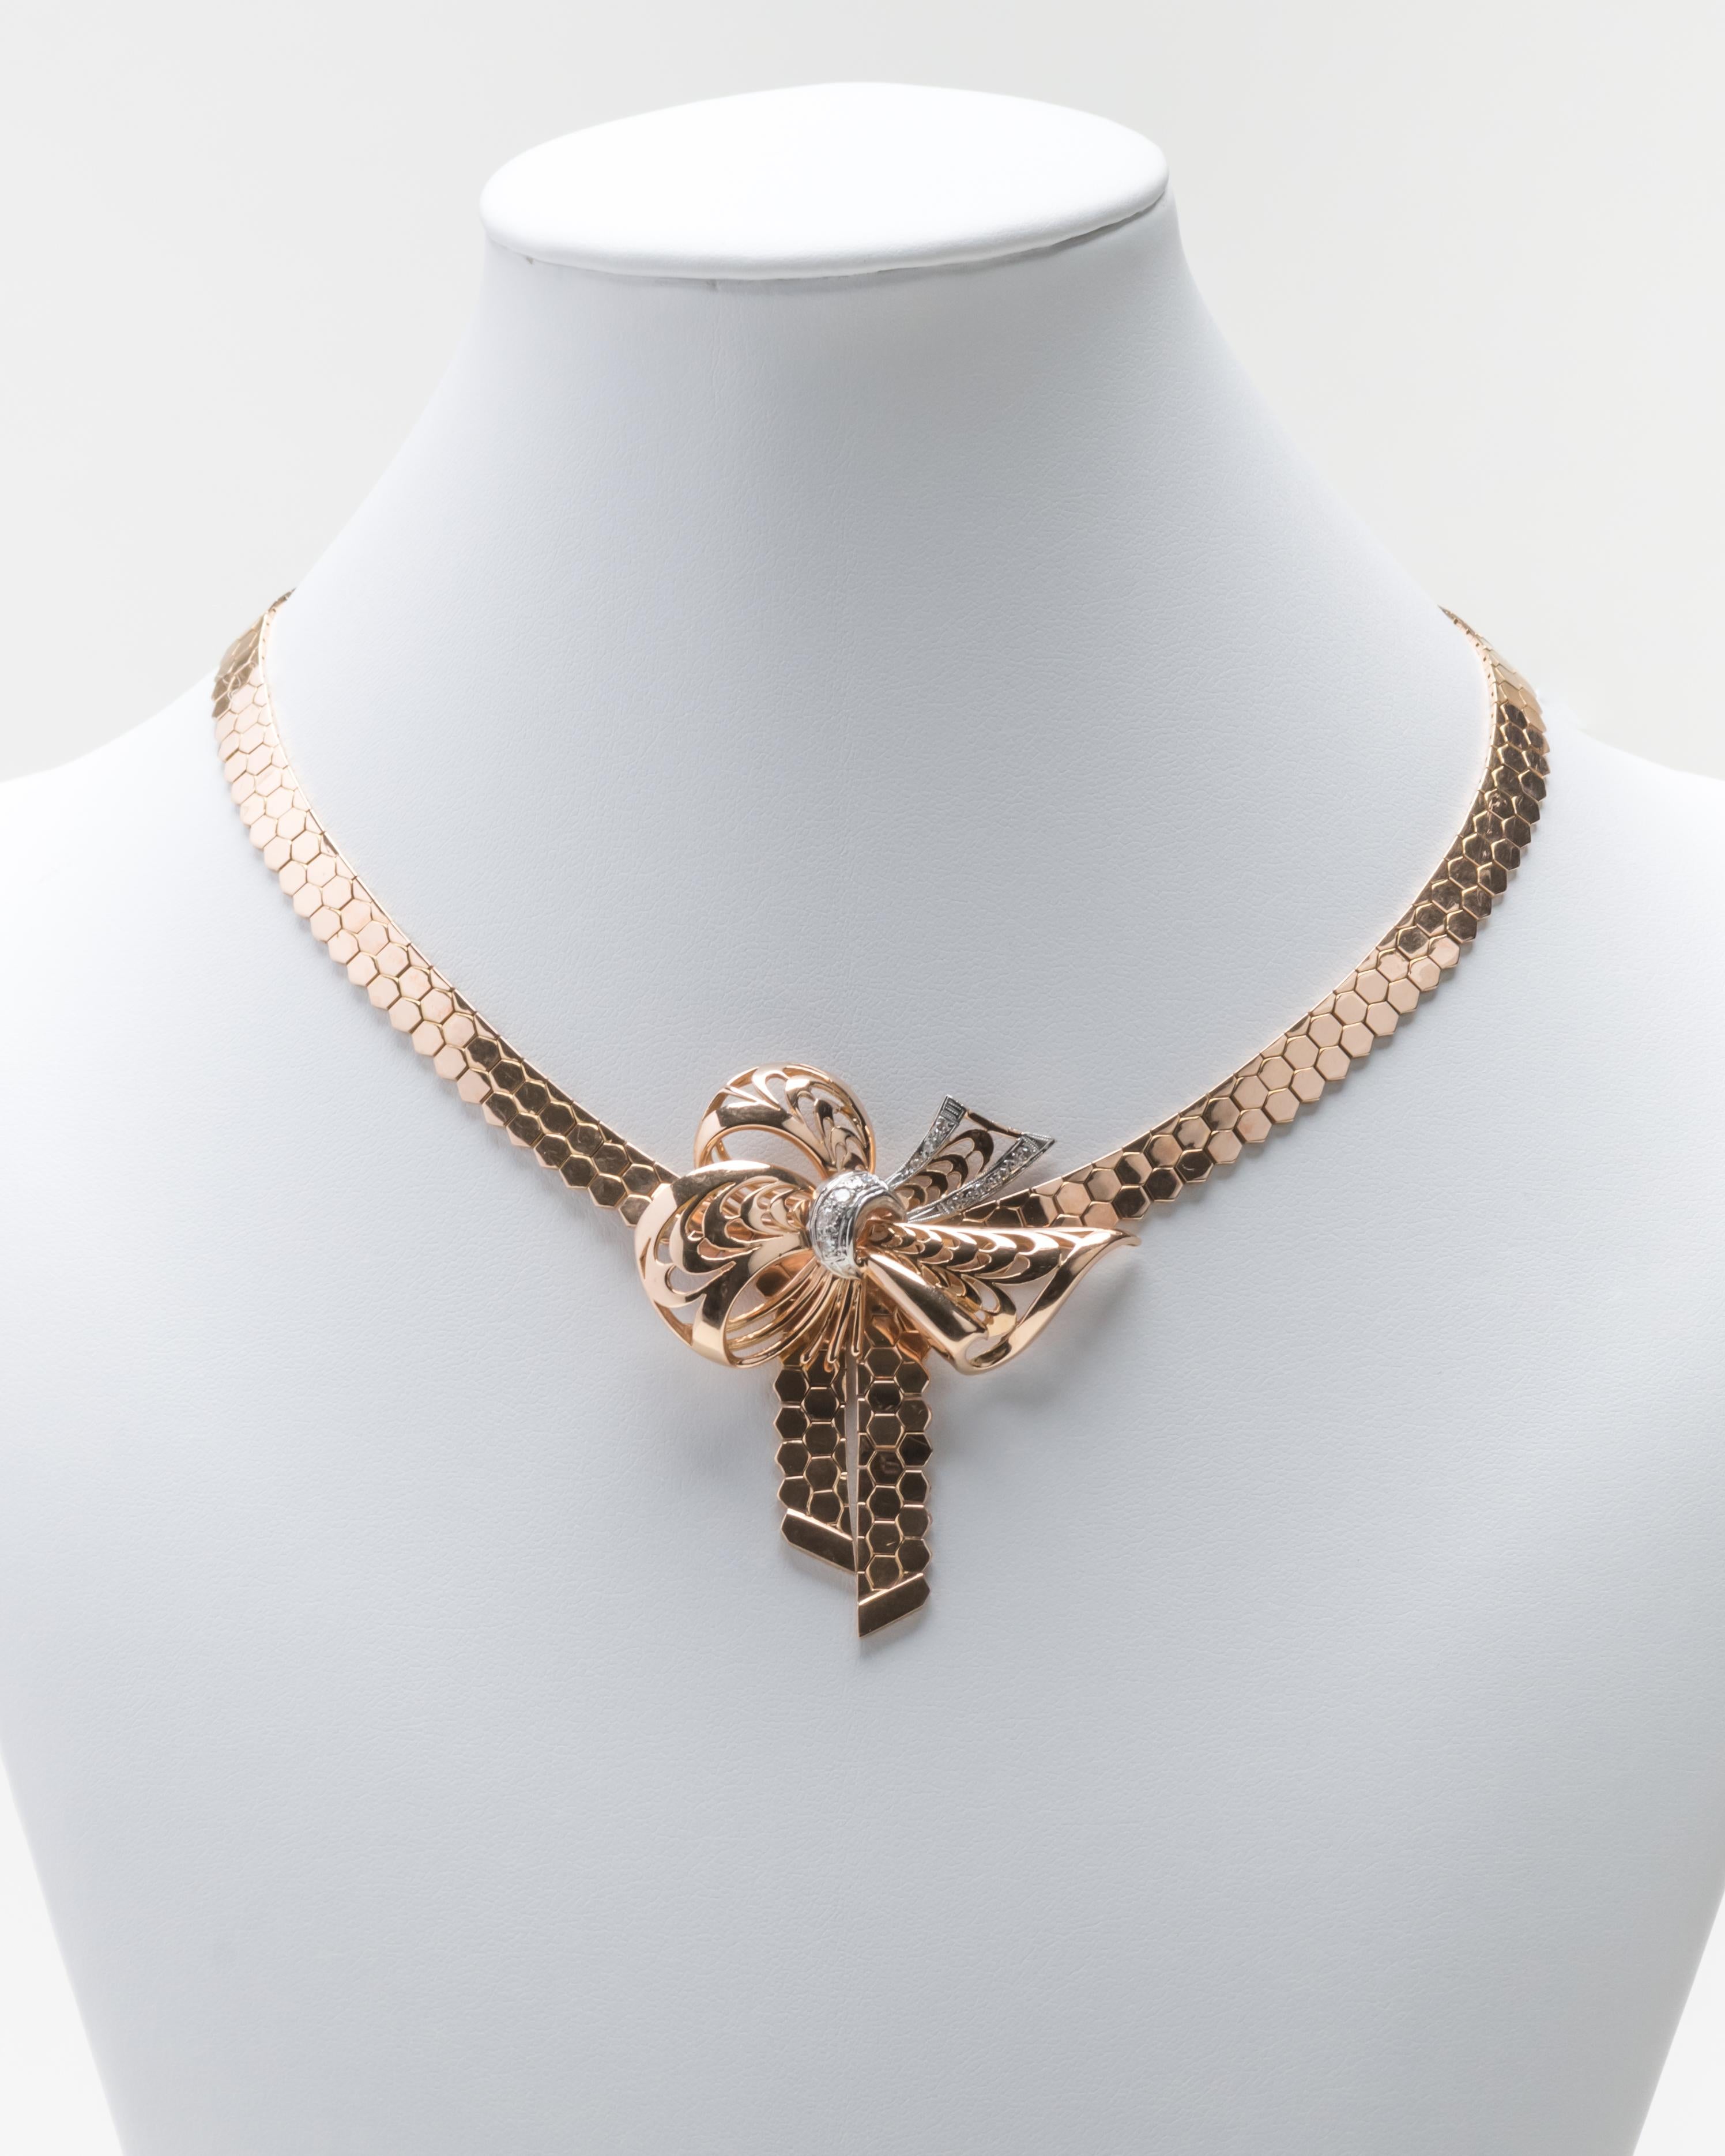 Finely detailed retro 14 karat rose gold necklace with a geometric chain connecting to a central bow with diamonds inset in white gold. The necklace has superior design and craftsmanship.

Size: L: 16.75